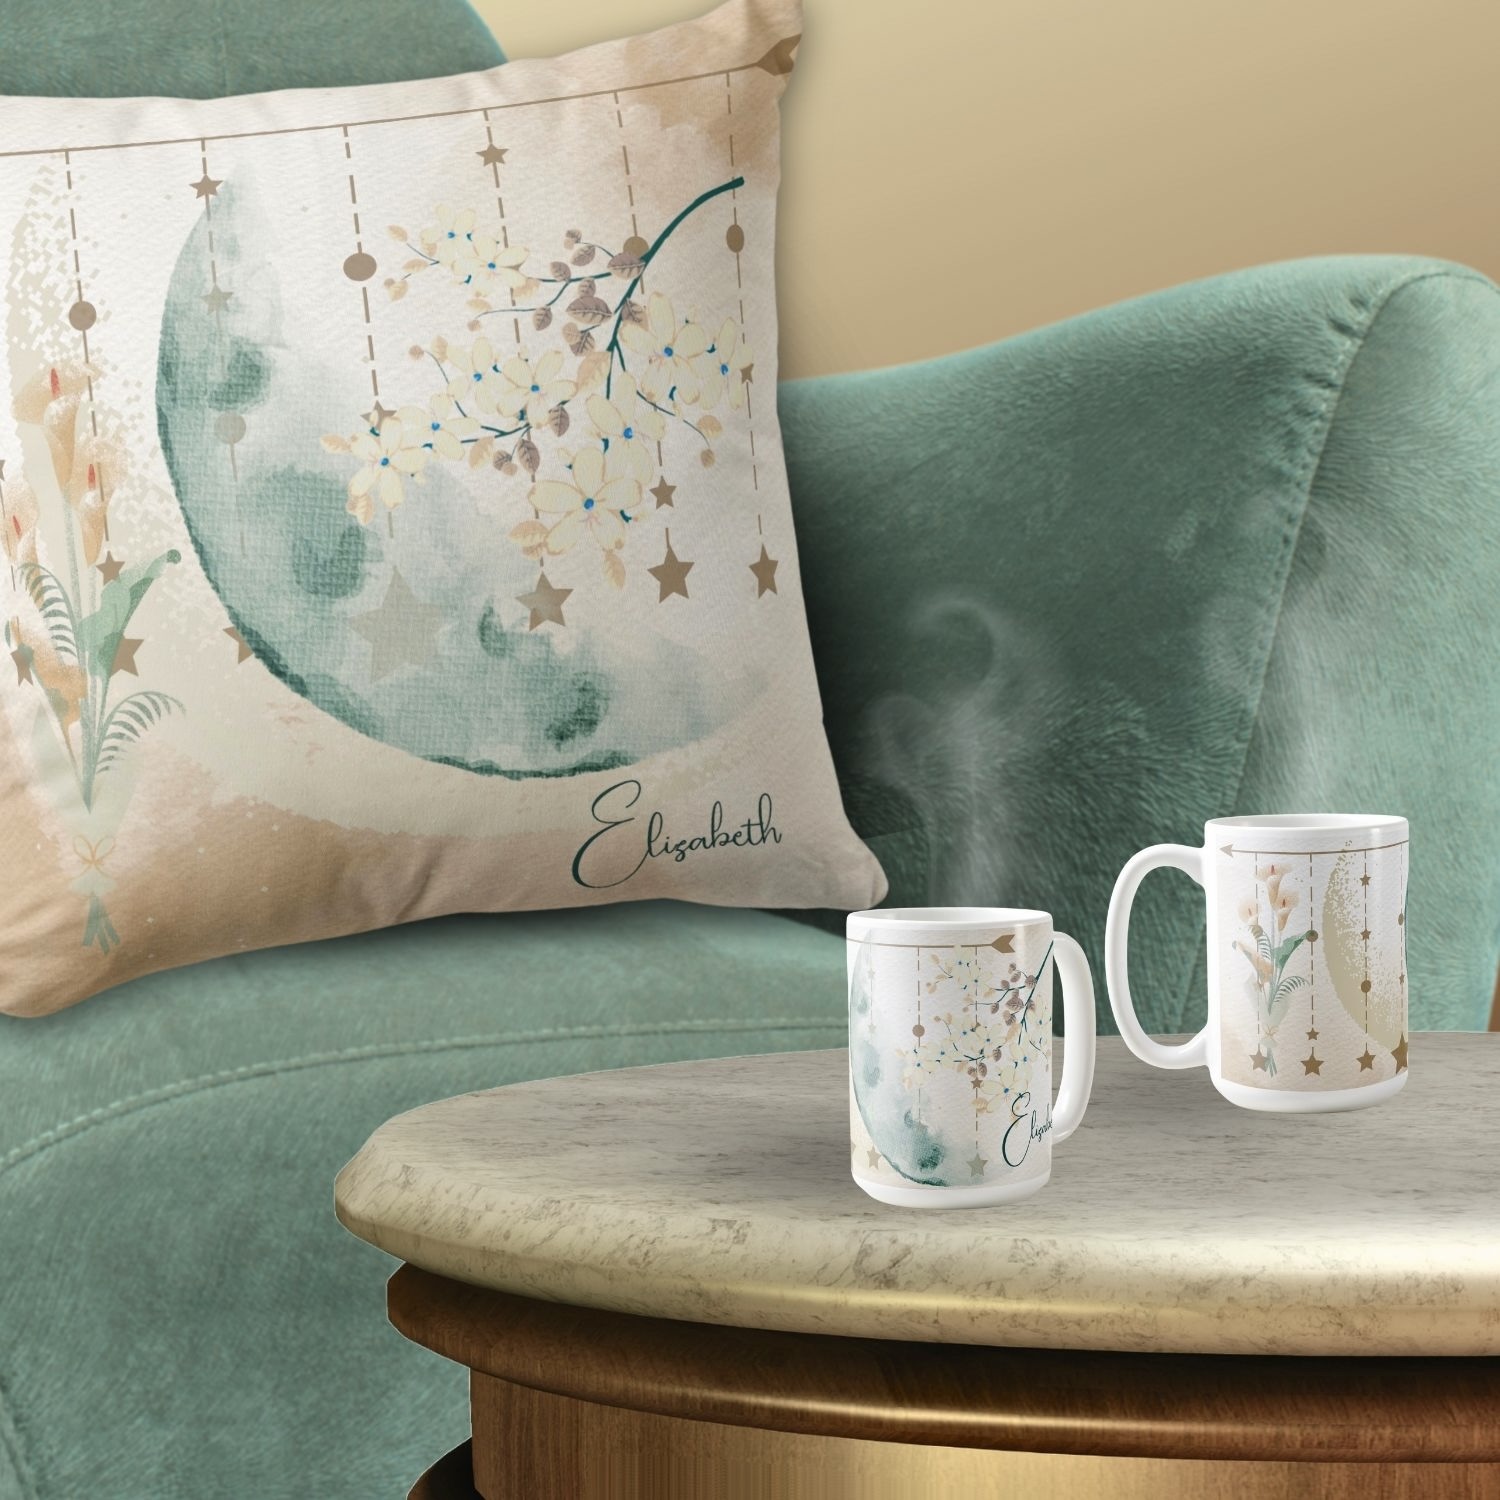 Experience tranquility with our Moonlit Flowers Decorative Mug and Pillow Set, beautifully placed on a cozy couch and center table.